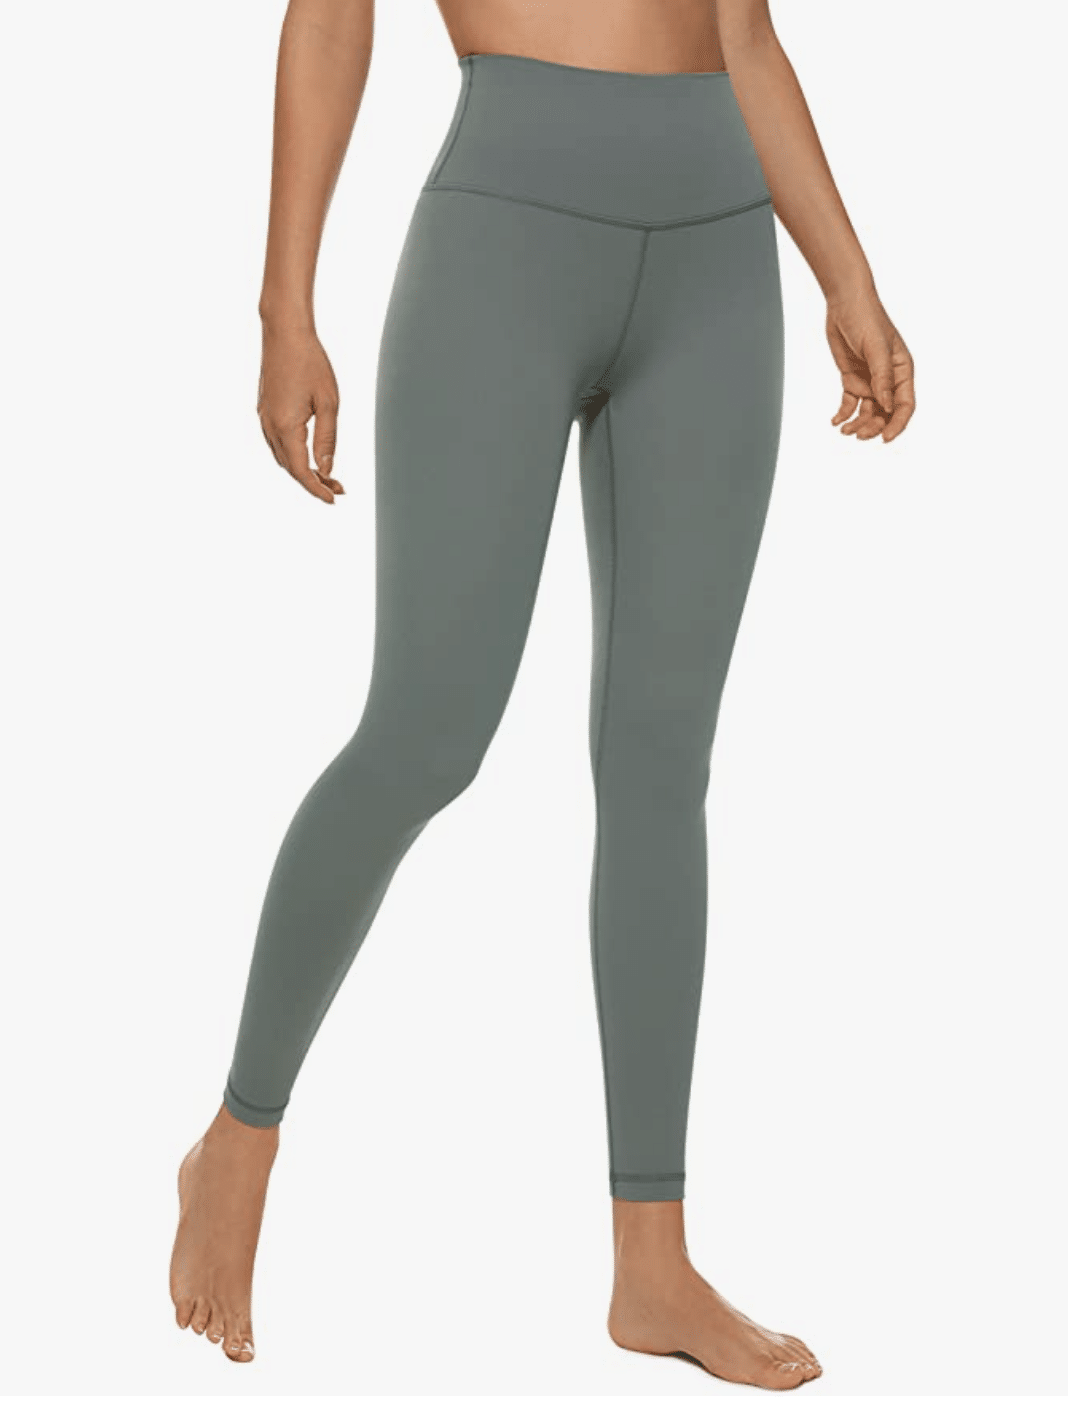 I hsve found the best lululemon legging dupes that are the best